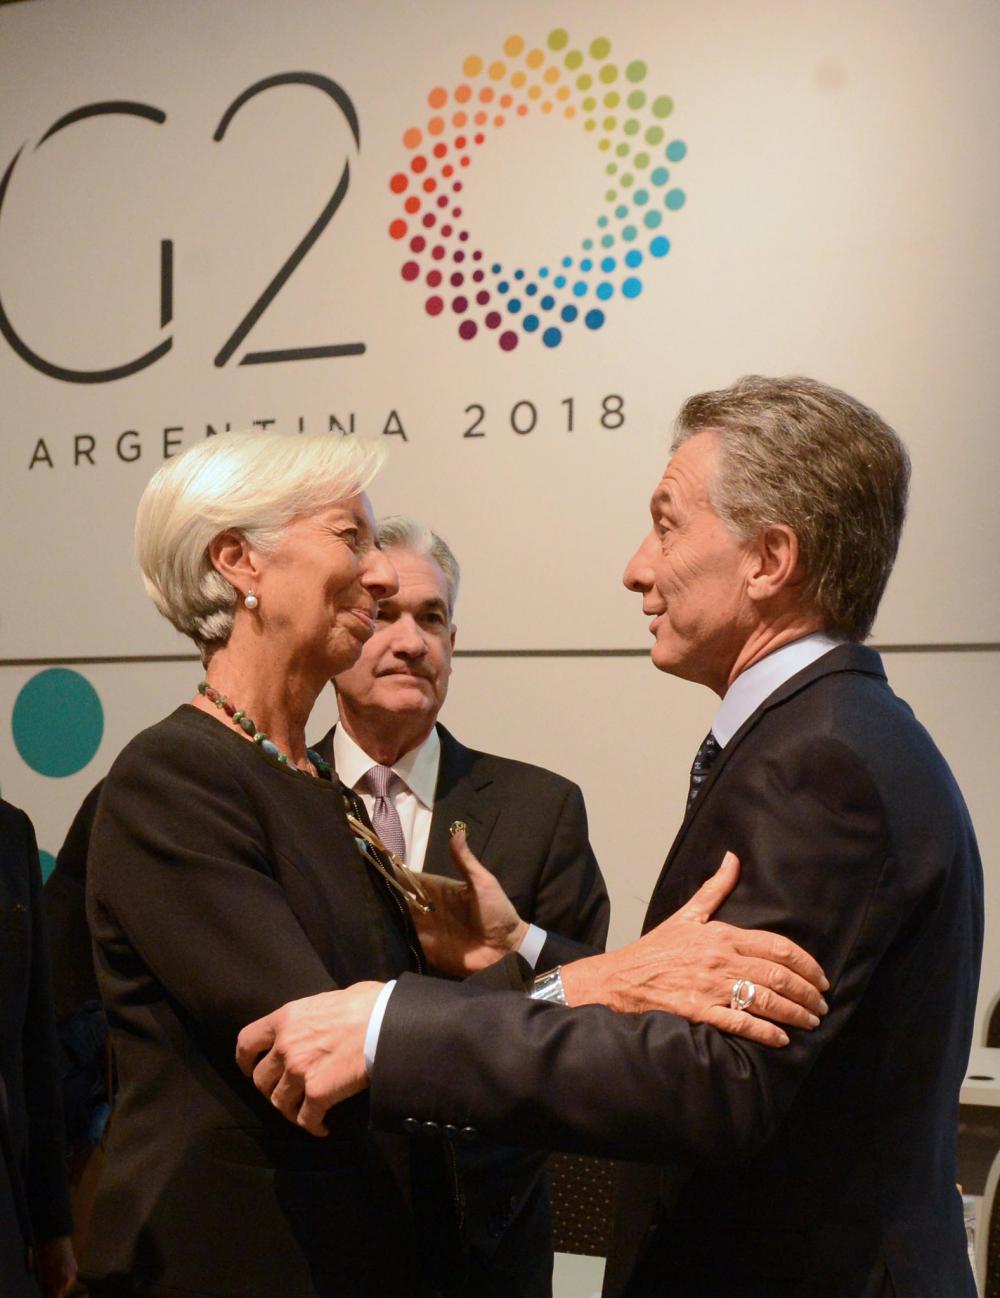 IMF Managing Director Christine Lagarde and Argentine President Mauricio Macri at the G20 summit in Argentina, 2018. CREDIT: G20 Argentina (CC BY 2.0)